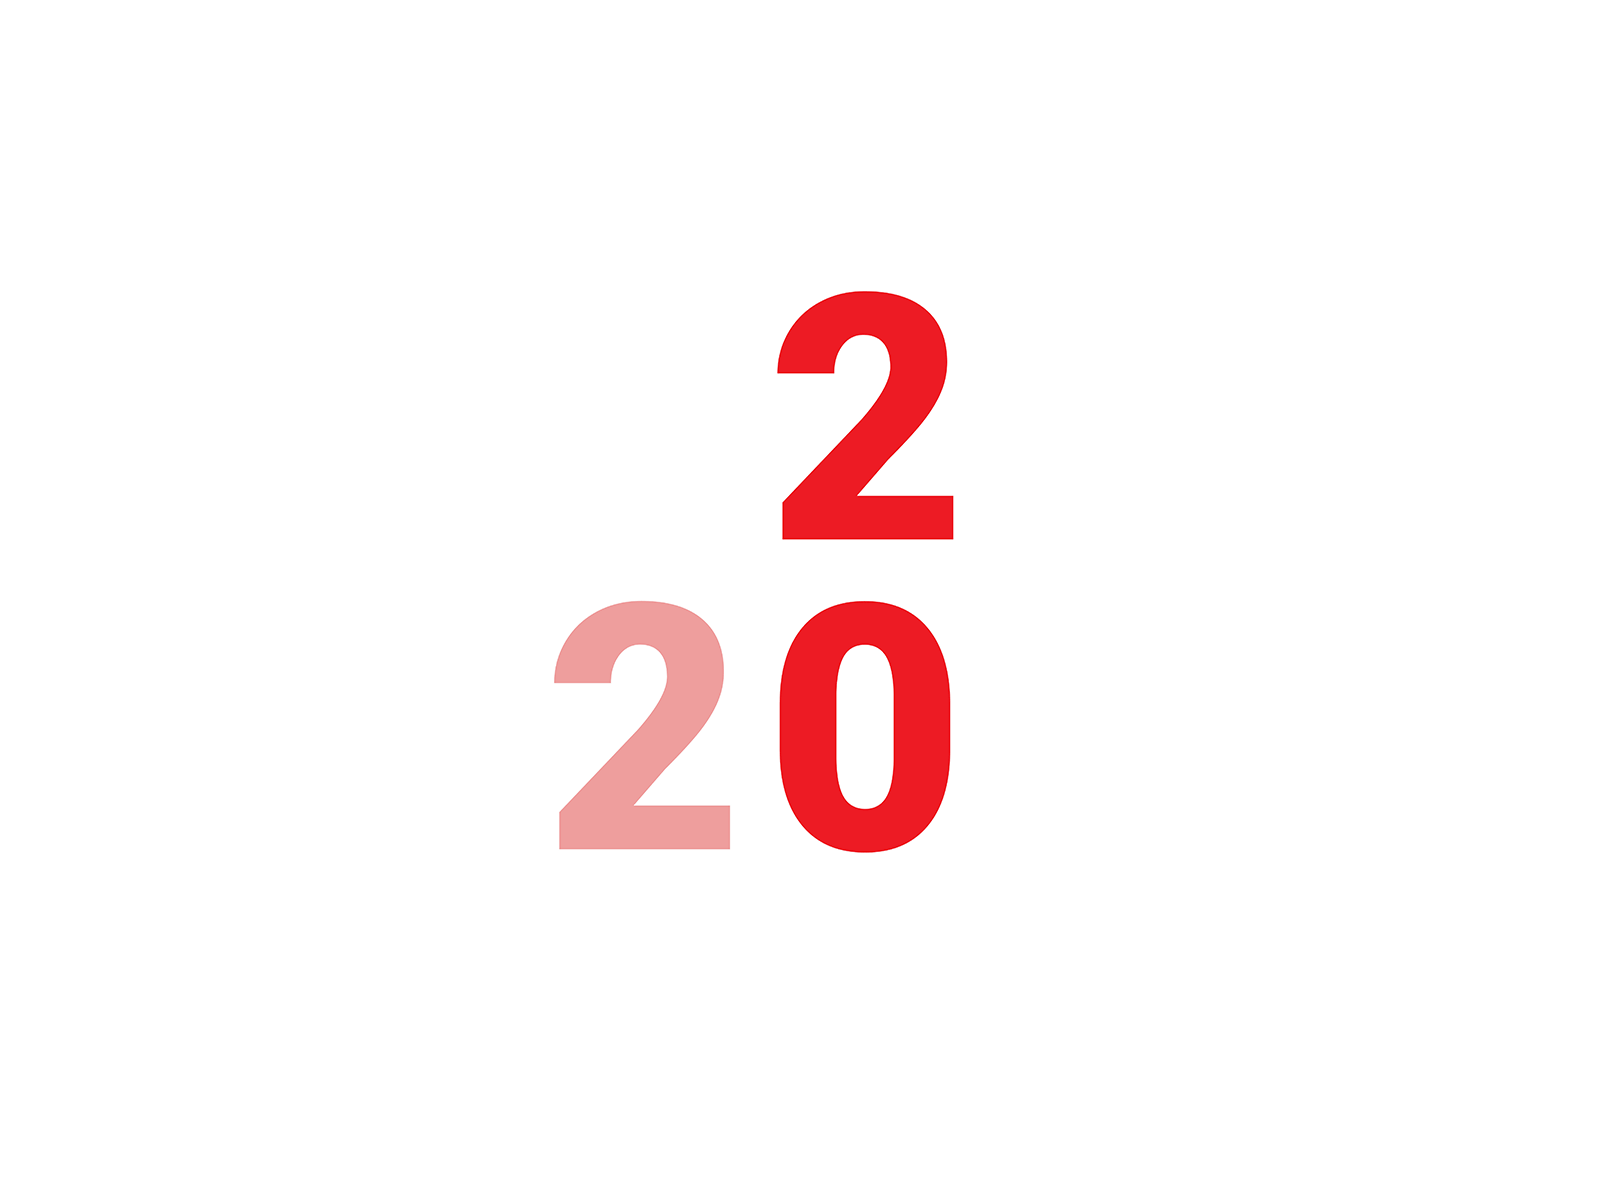 2020 2020 2020 trend animated gif dribbble flat frame by frame happy new year holidays minimal art new year new years typography vector